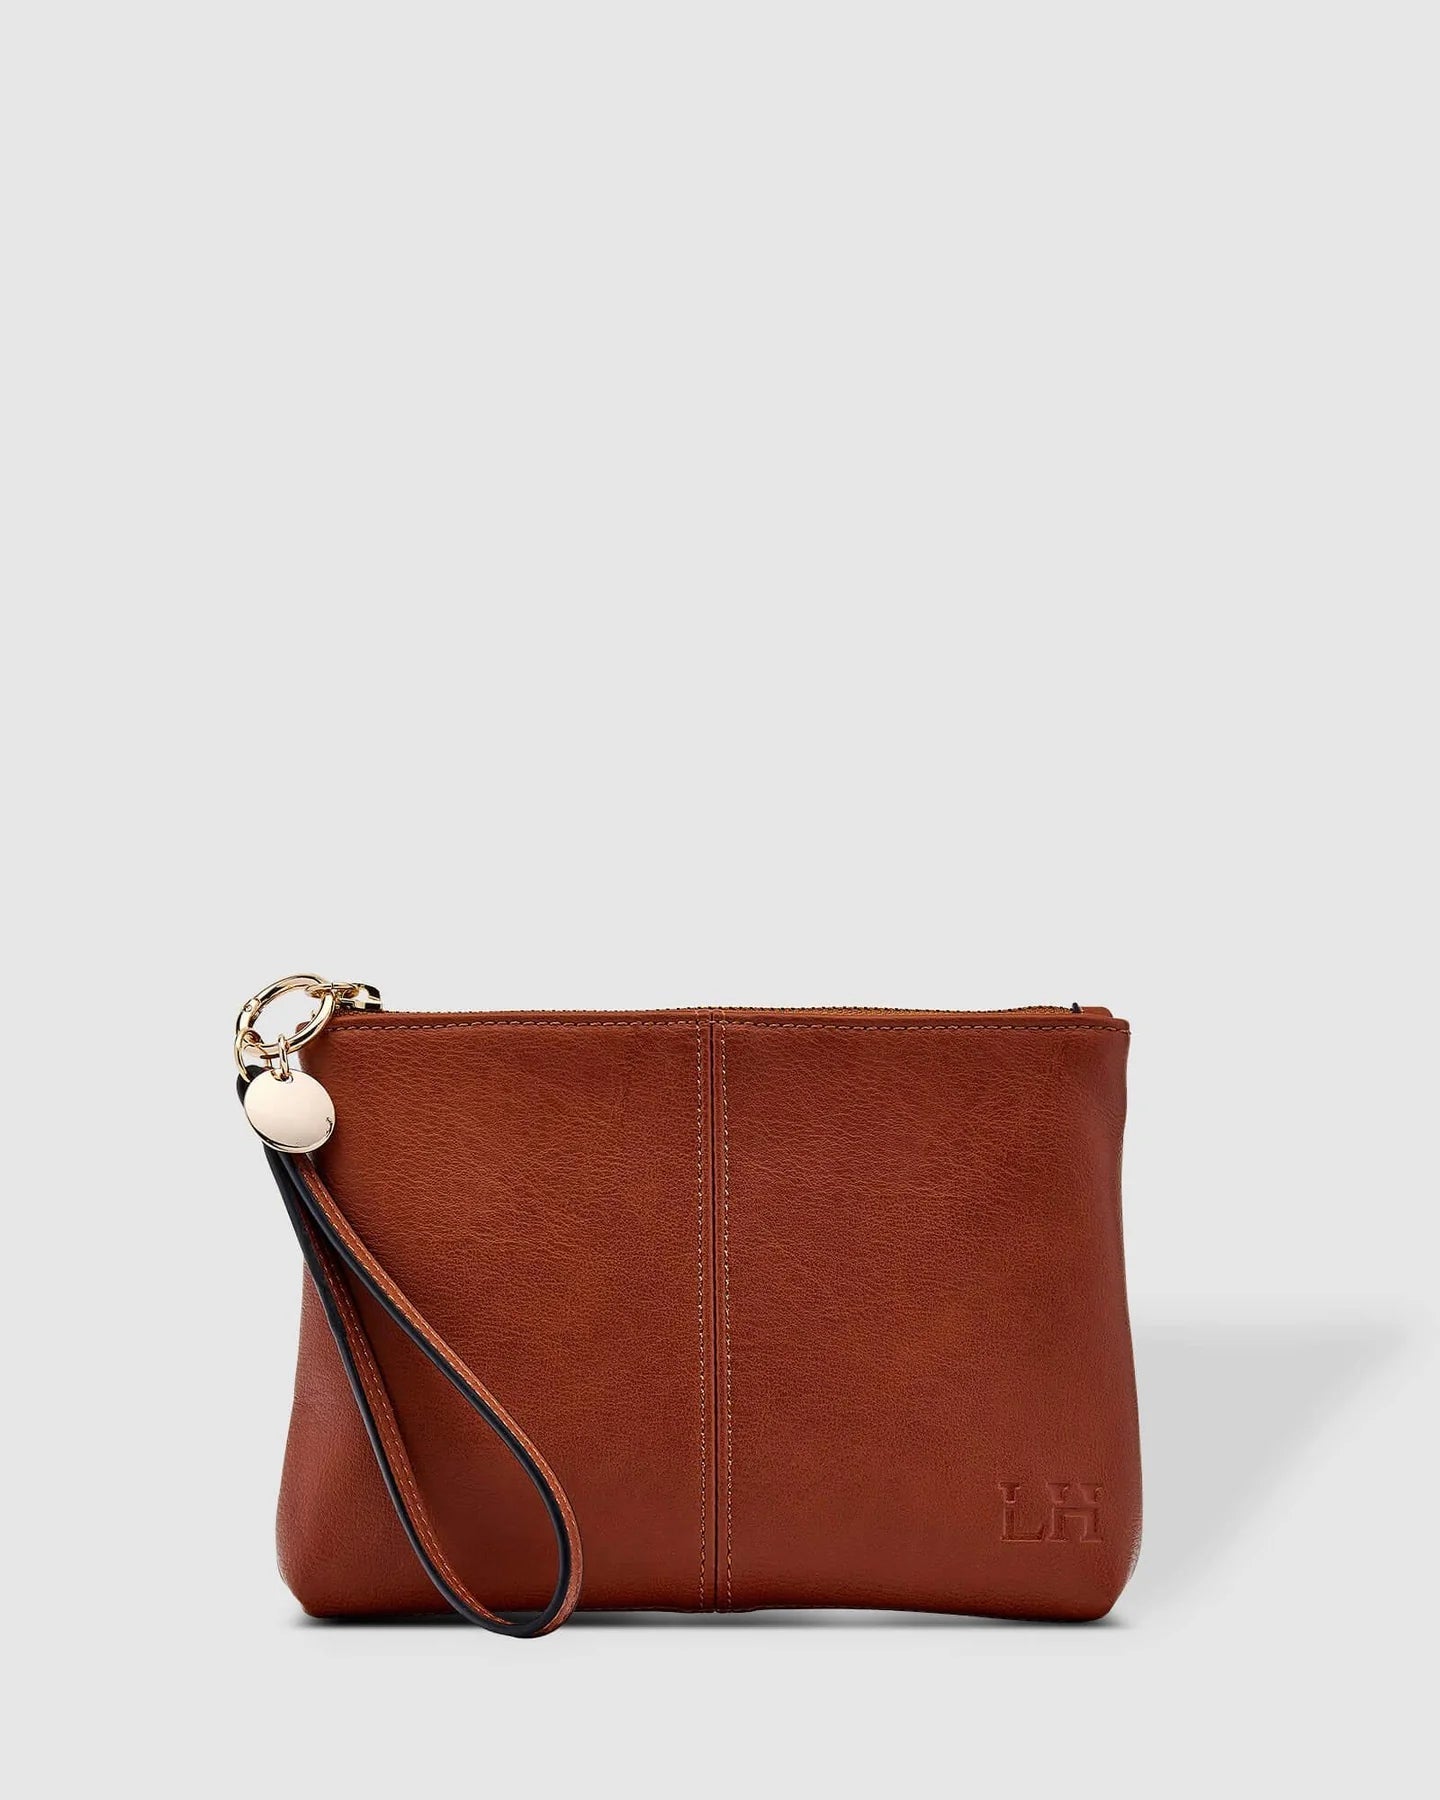 Baby Gracie Clutch (Tan) - Something For Me​​